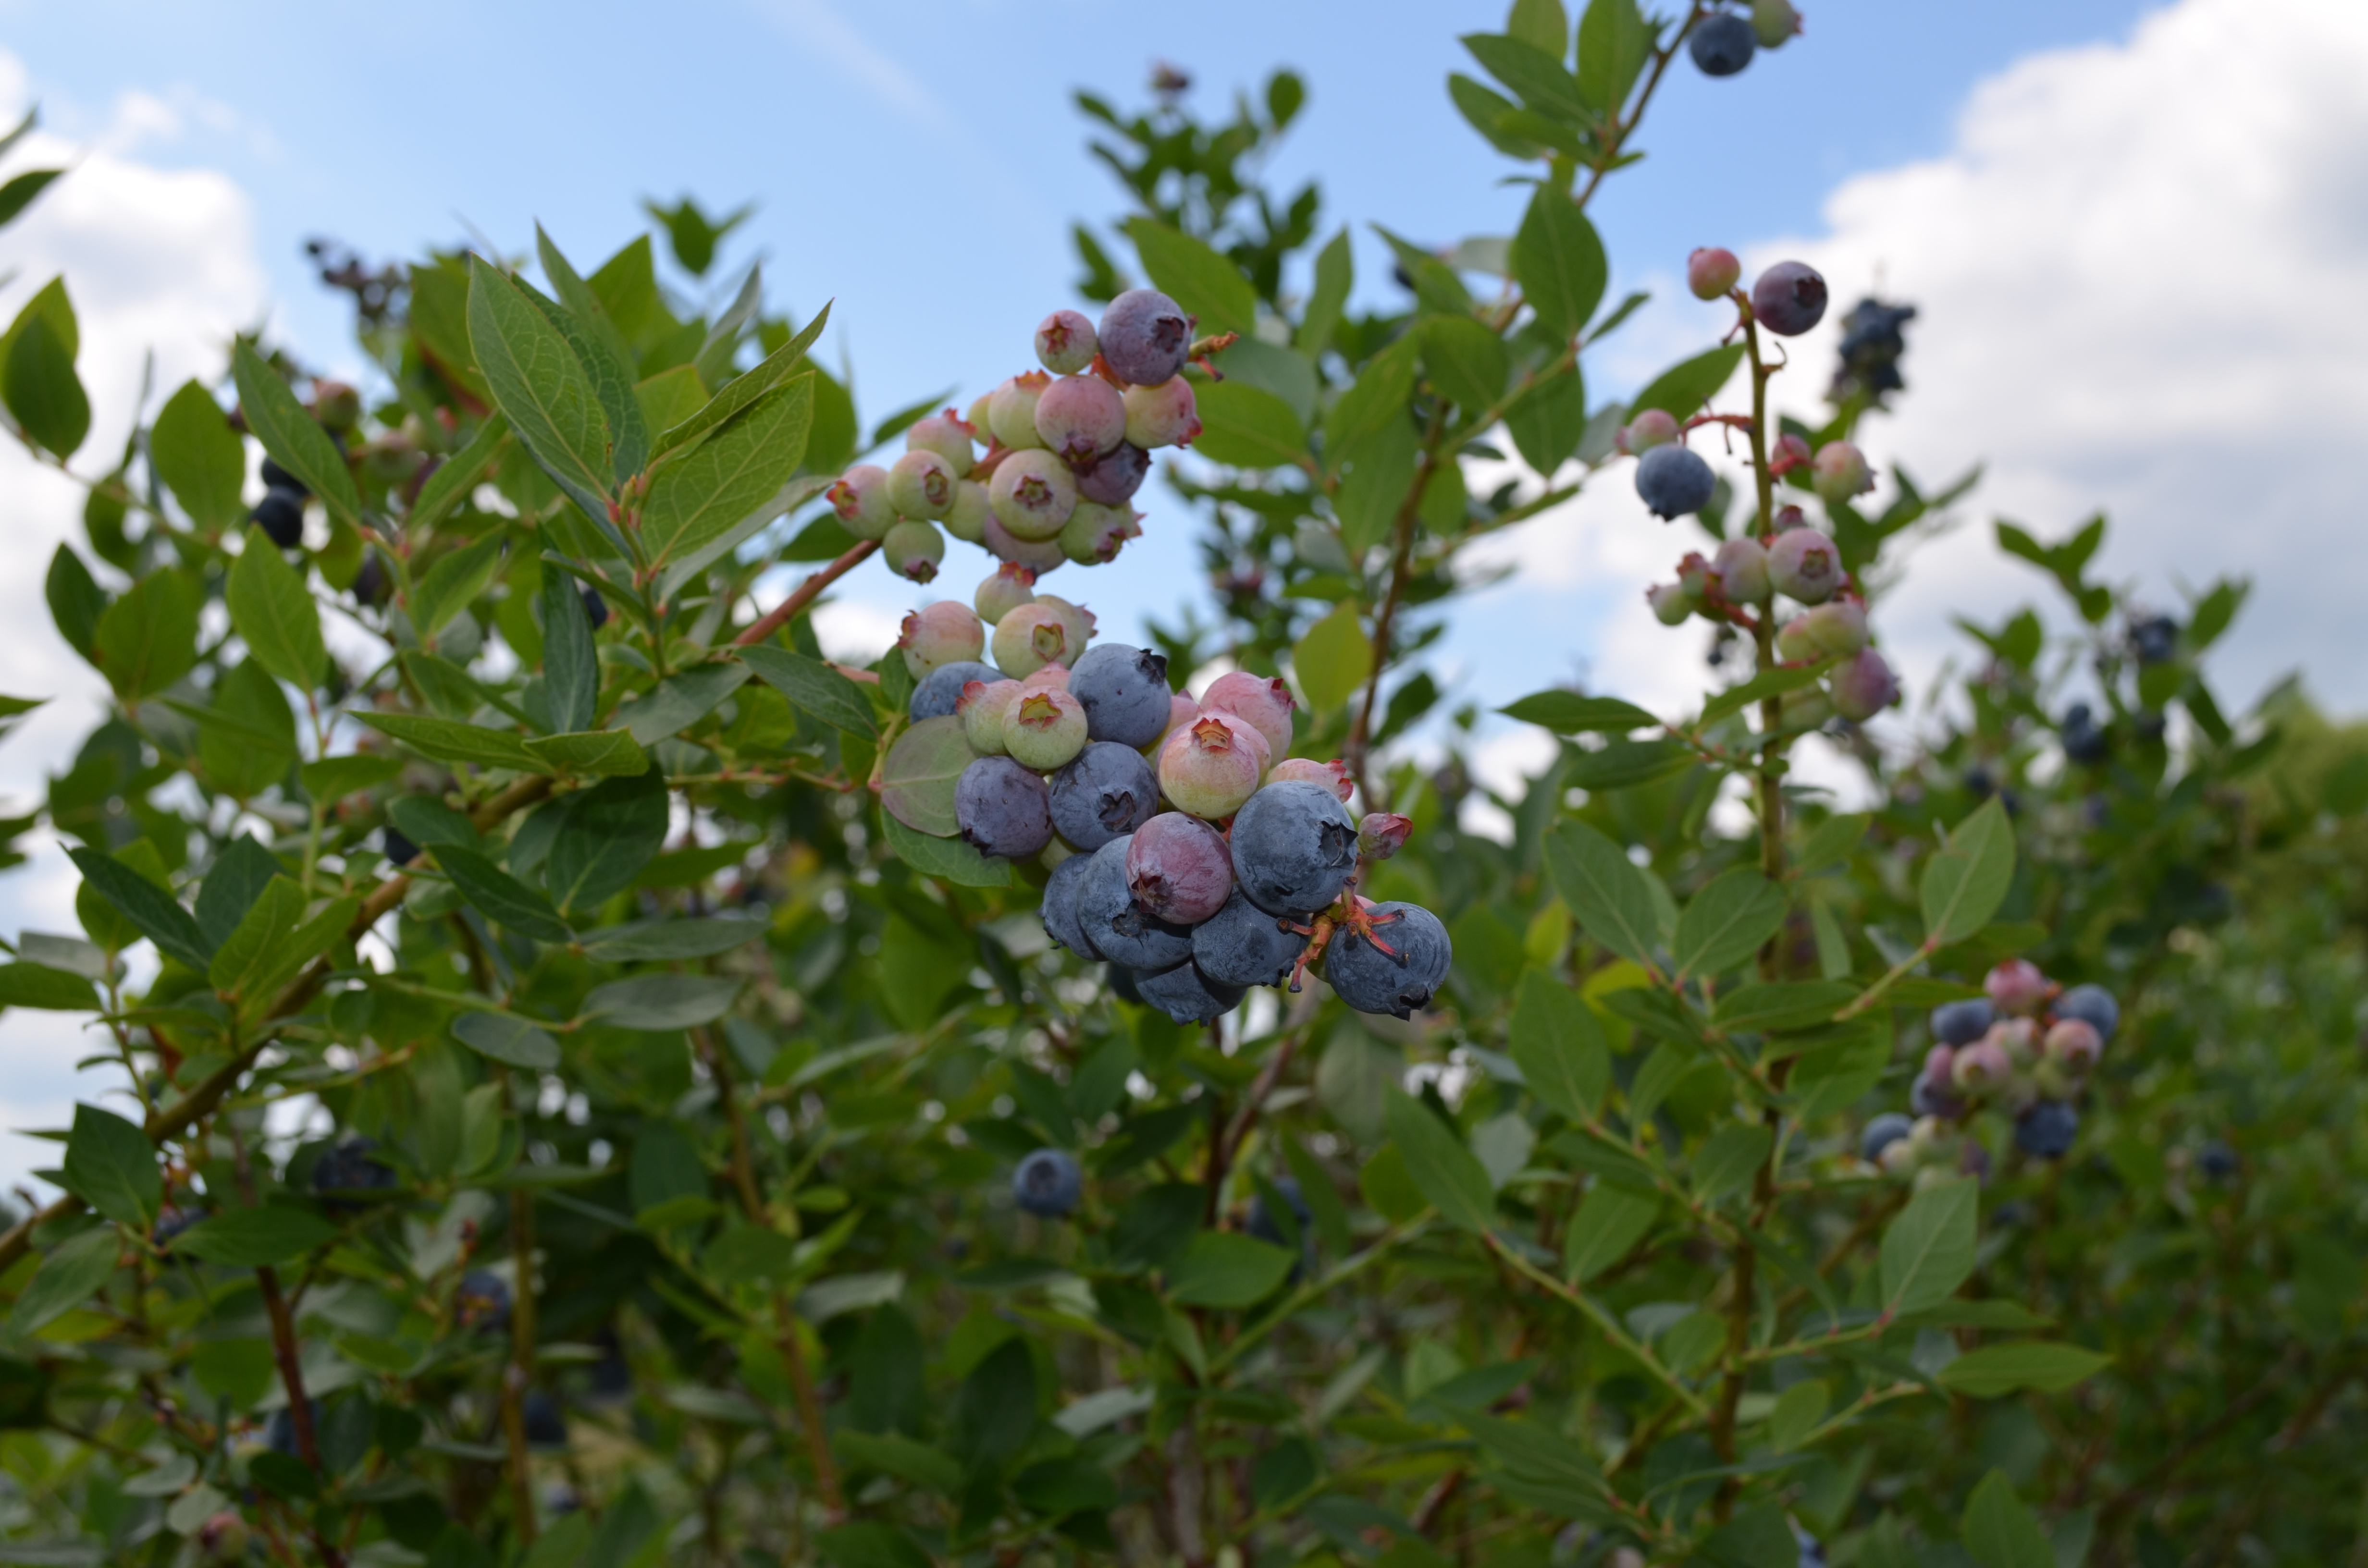 Blueberry Cluster - Image Credit UF / IFAS - Jim Olmstead,